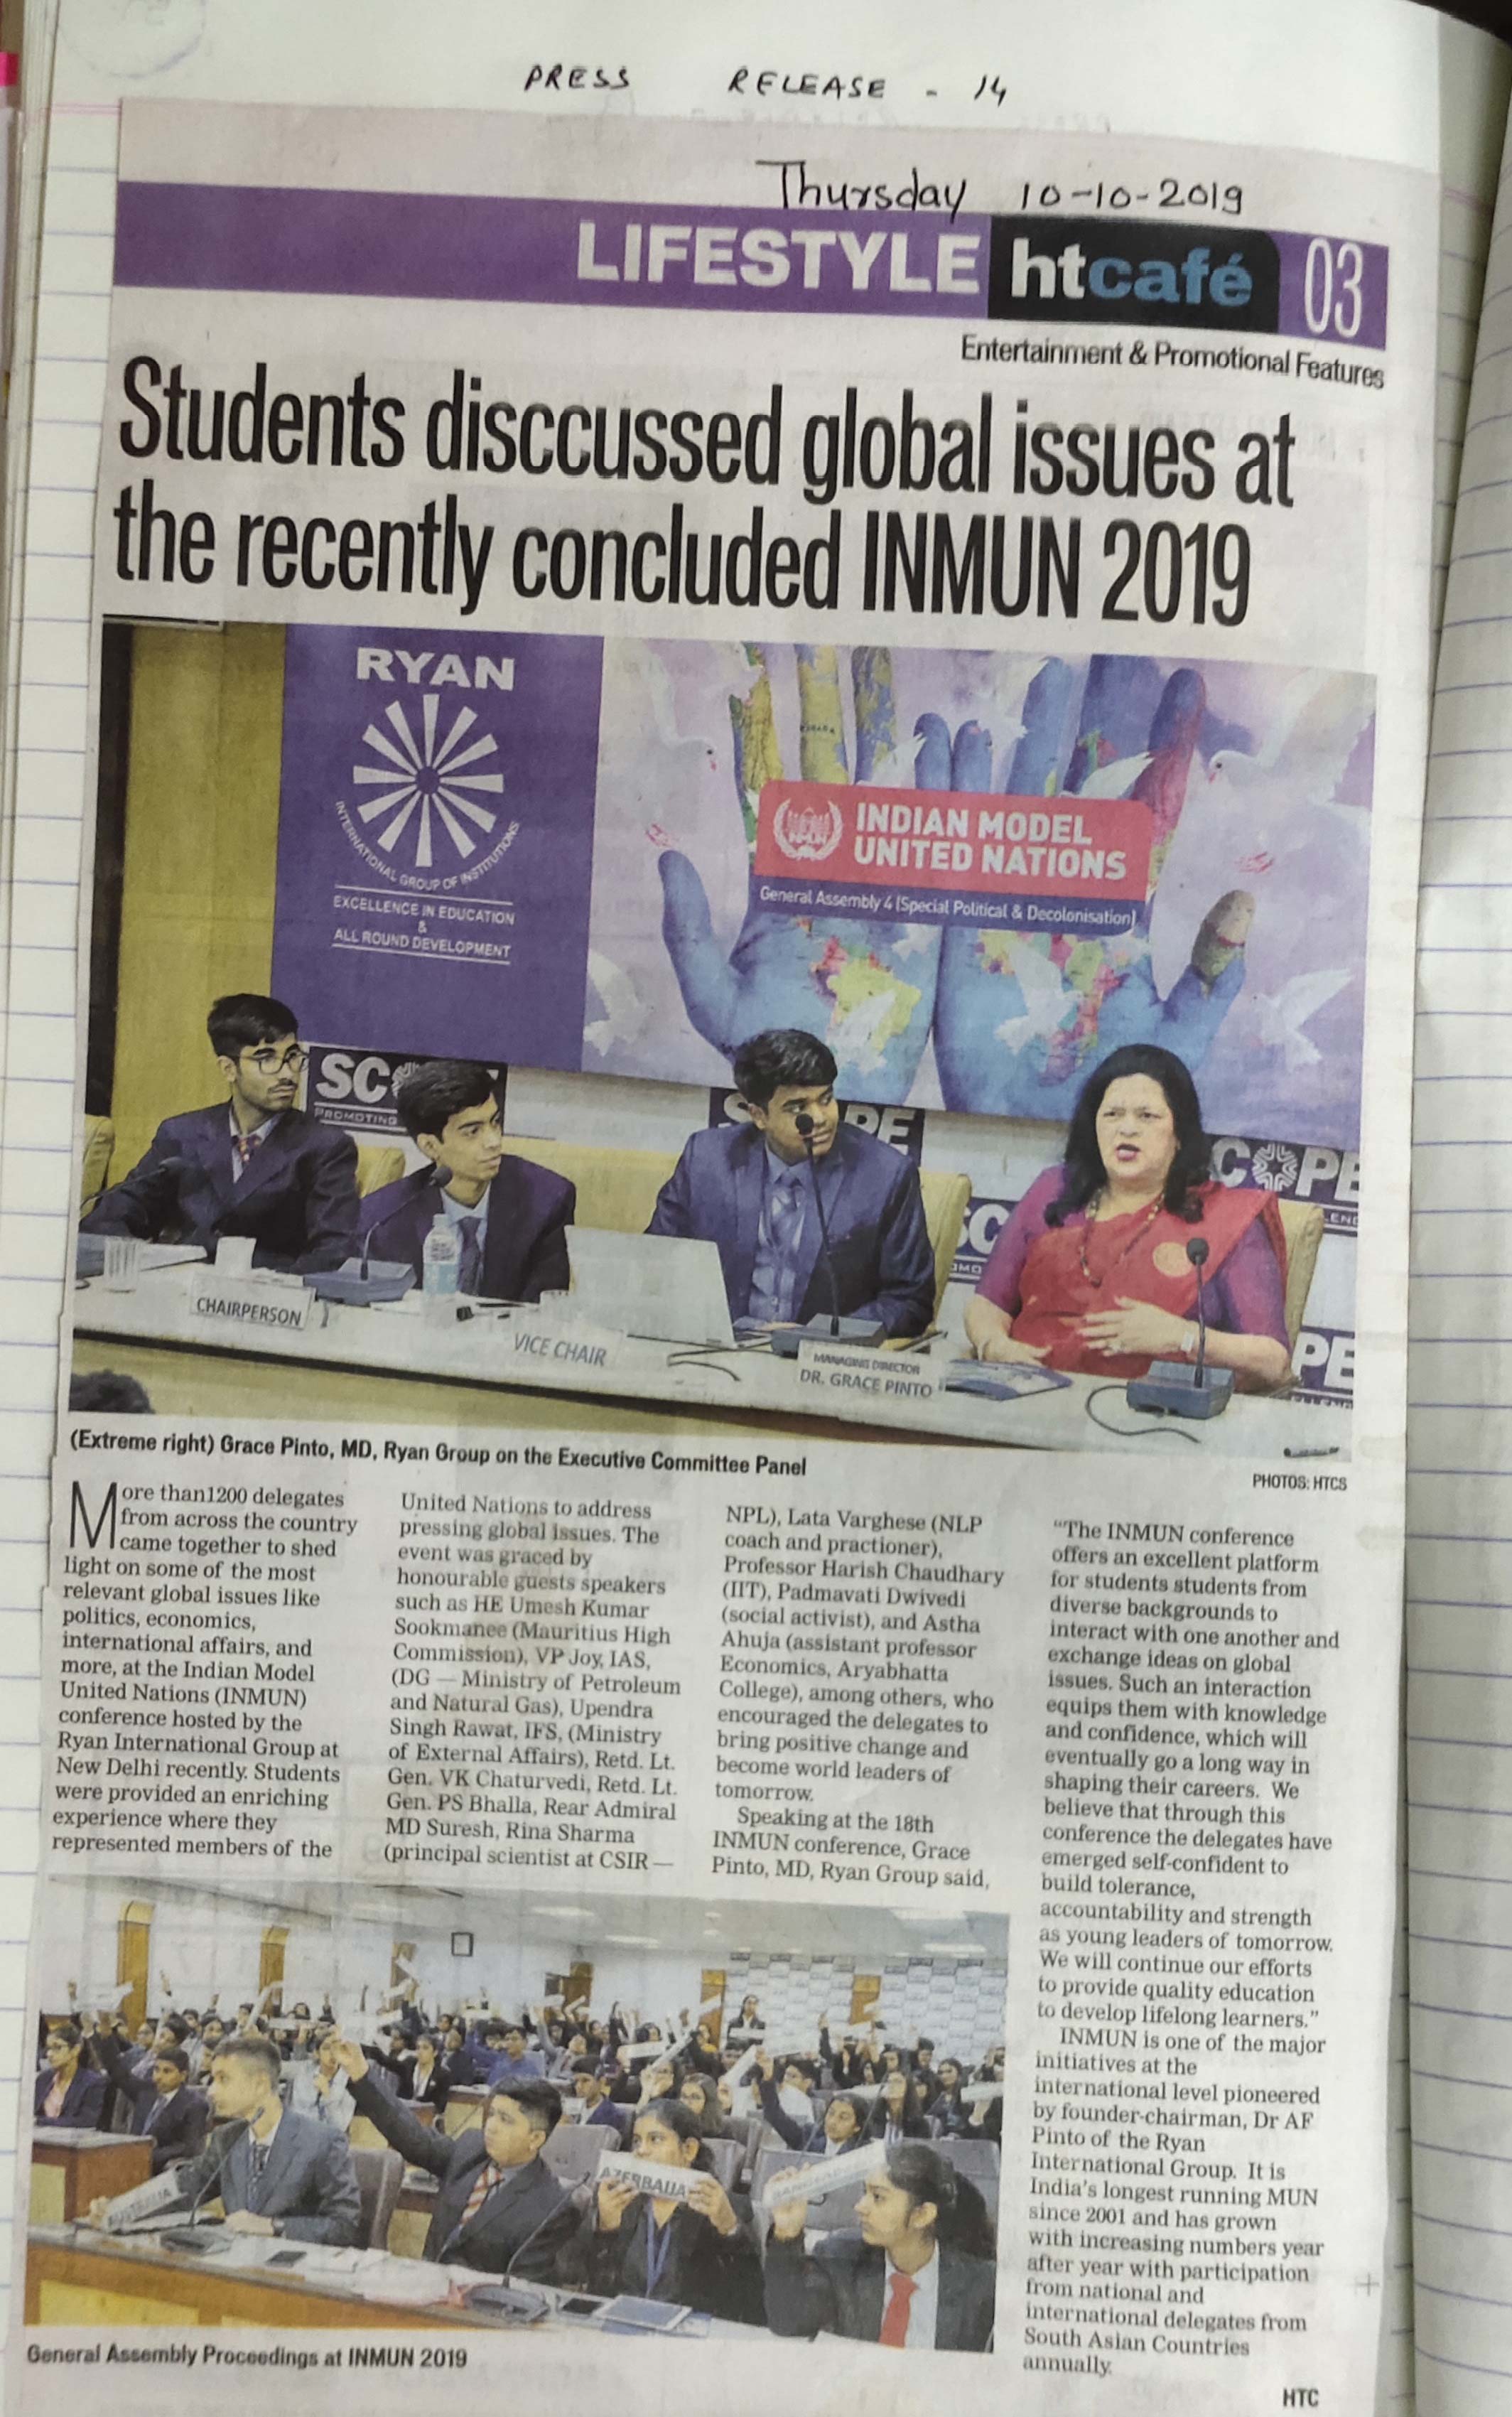 An article under the name “INMUN” was published in the Hindustan Times